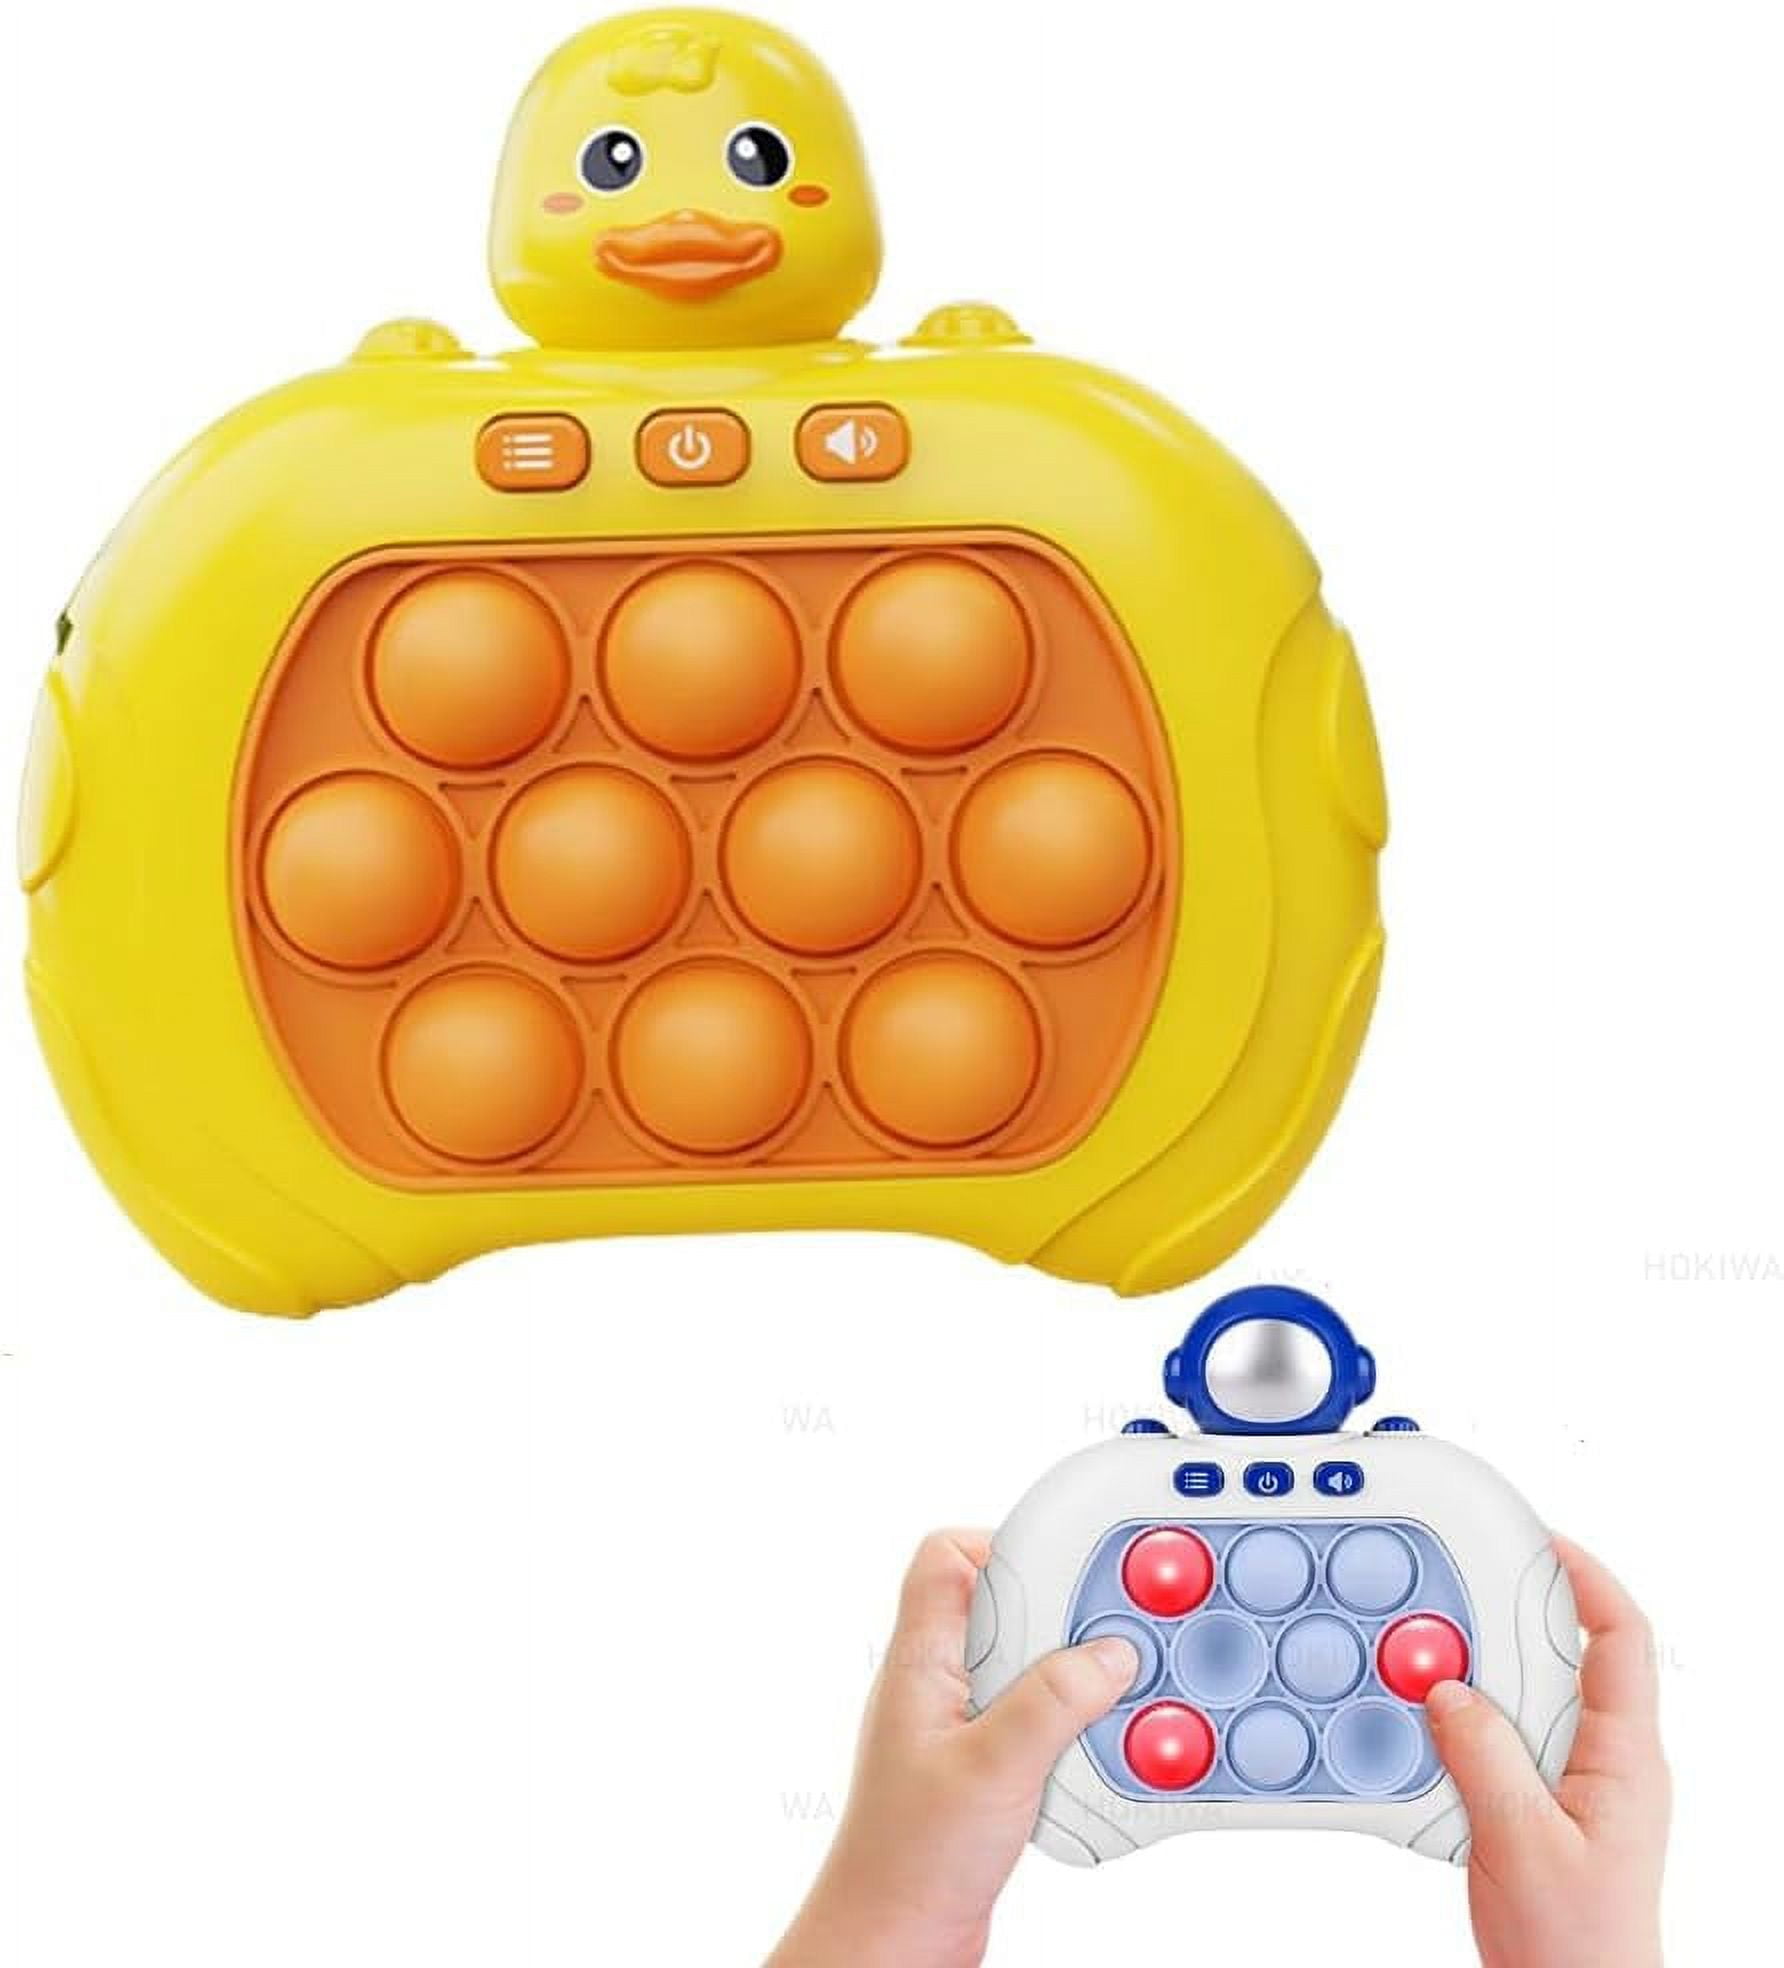 Pocket Game for Kids,Quick Push Bubble Competitive Game Console